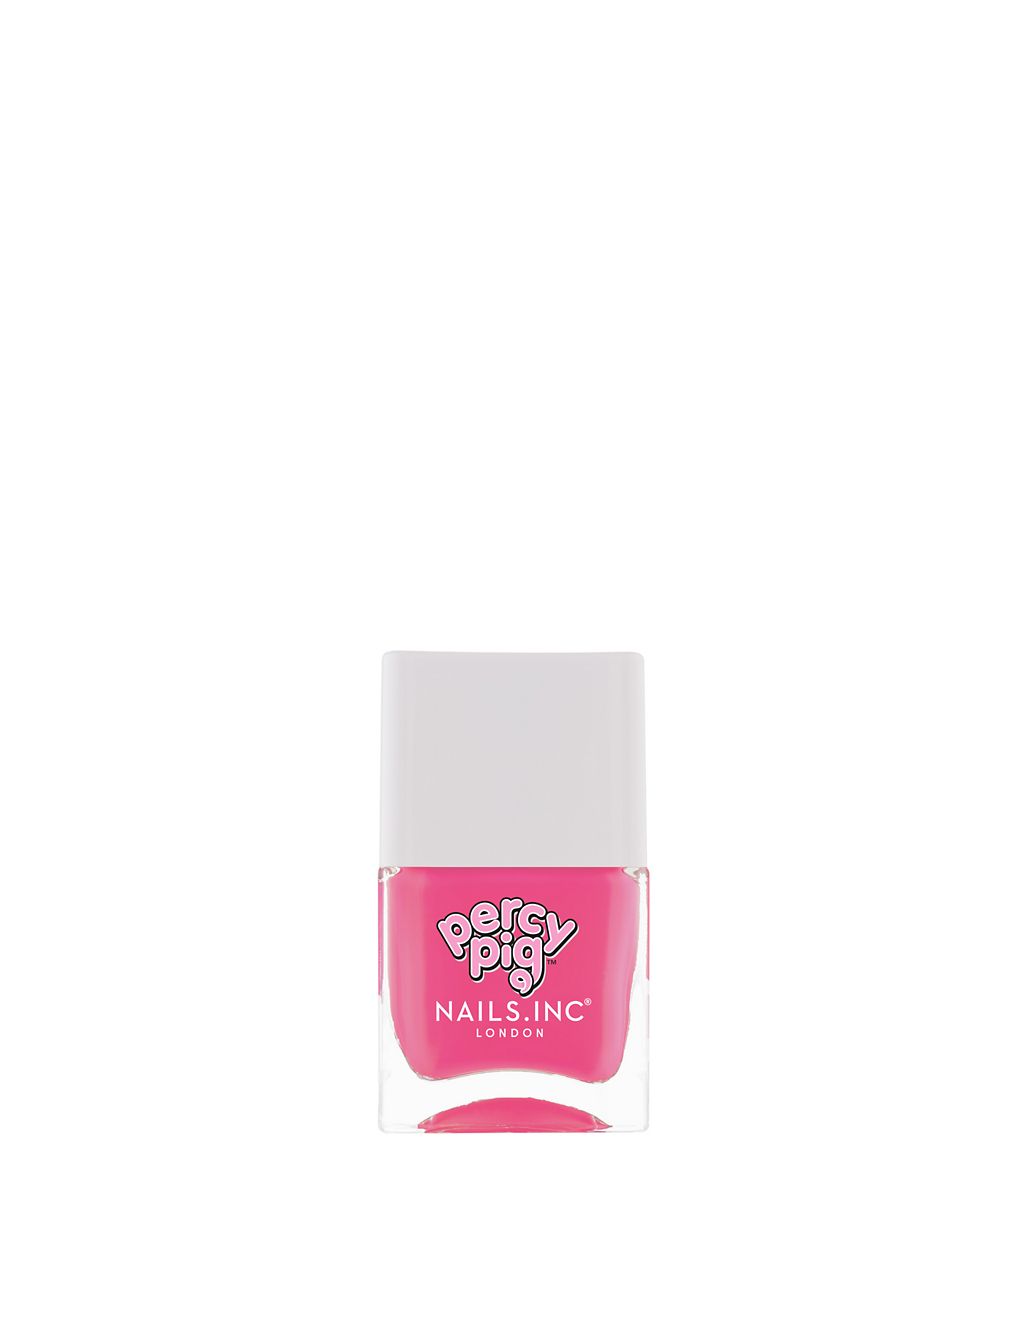 Nails.INC Percy Pig Phizzy Nail Polish Duo 2x14ml 2 of 6